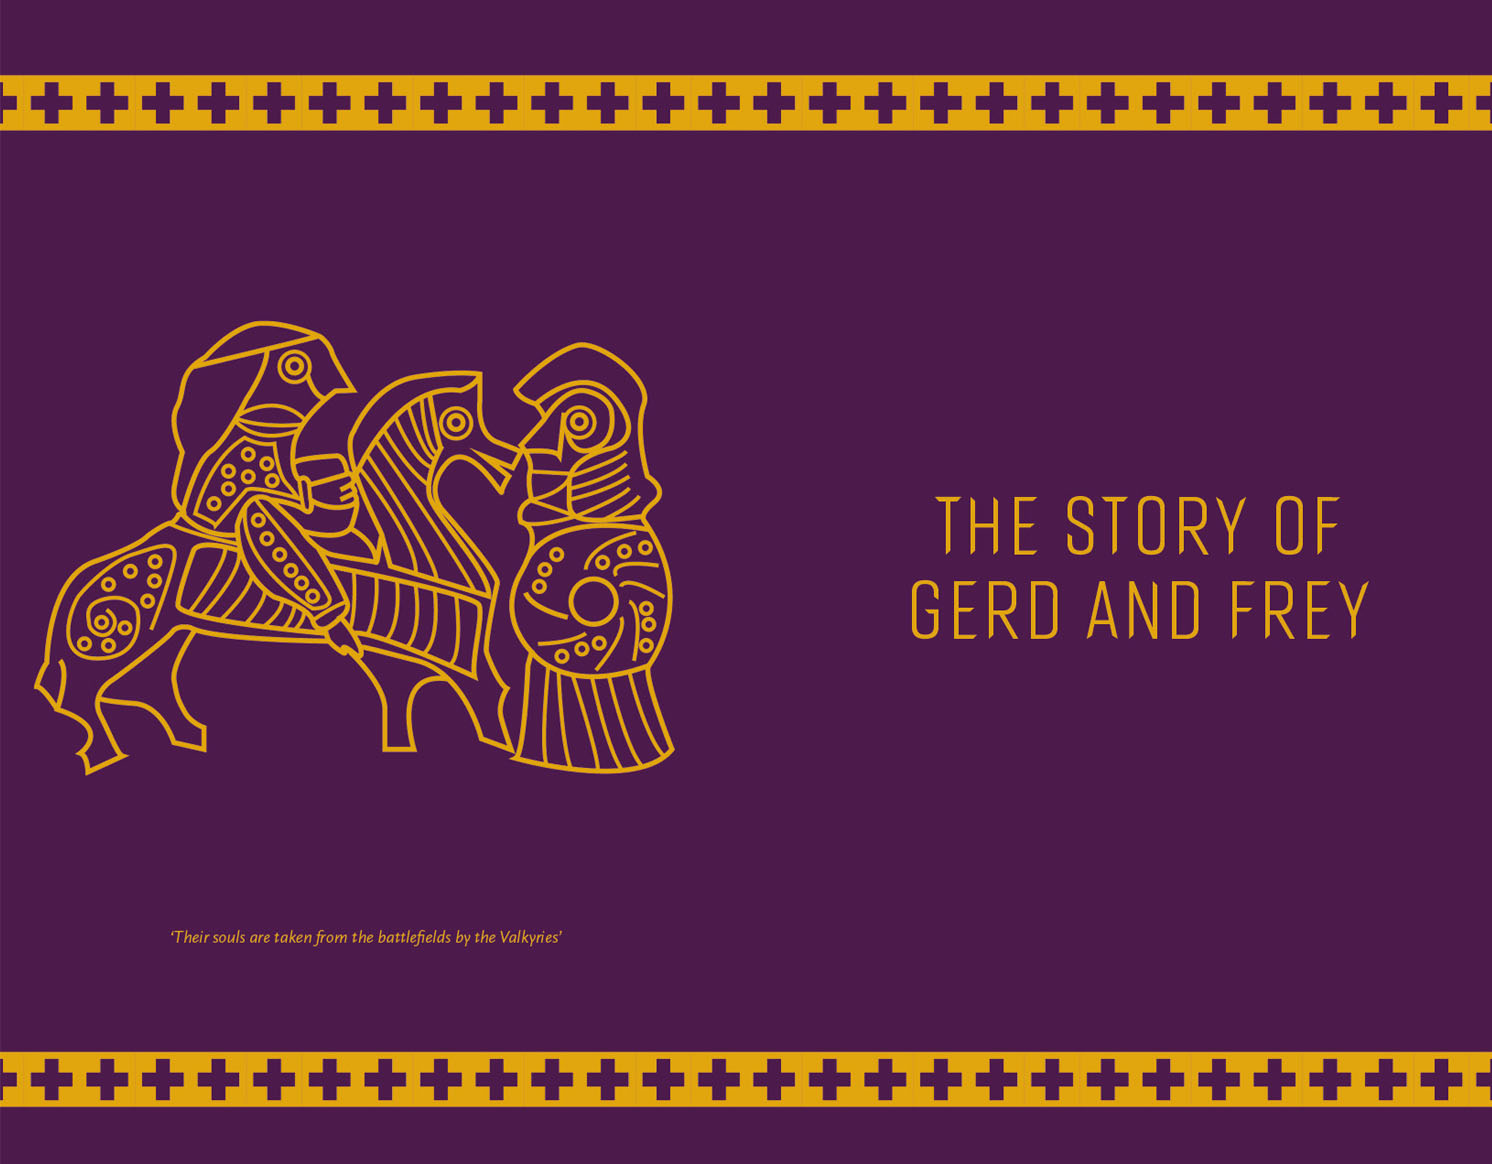 Chapter One of Book Three, ‘The Story of Gerd and Frey’, the illustration is a recreation of an Iron Age carving of a Valkyrie conducting a shield-maiden to Valhalla.